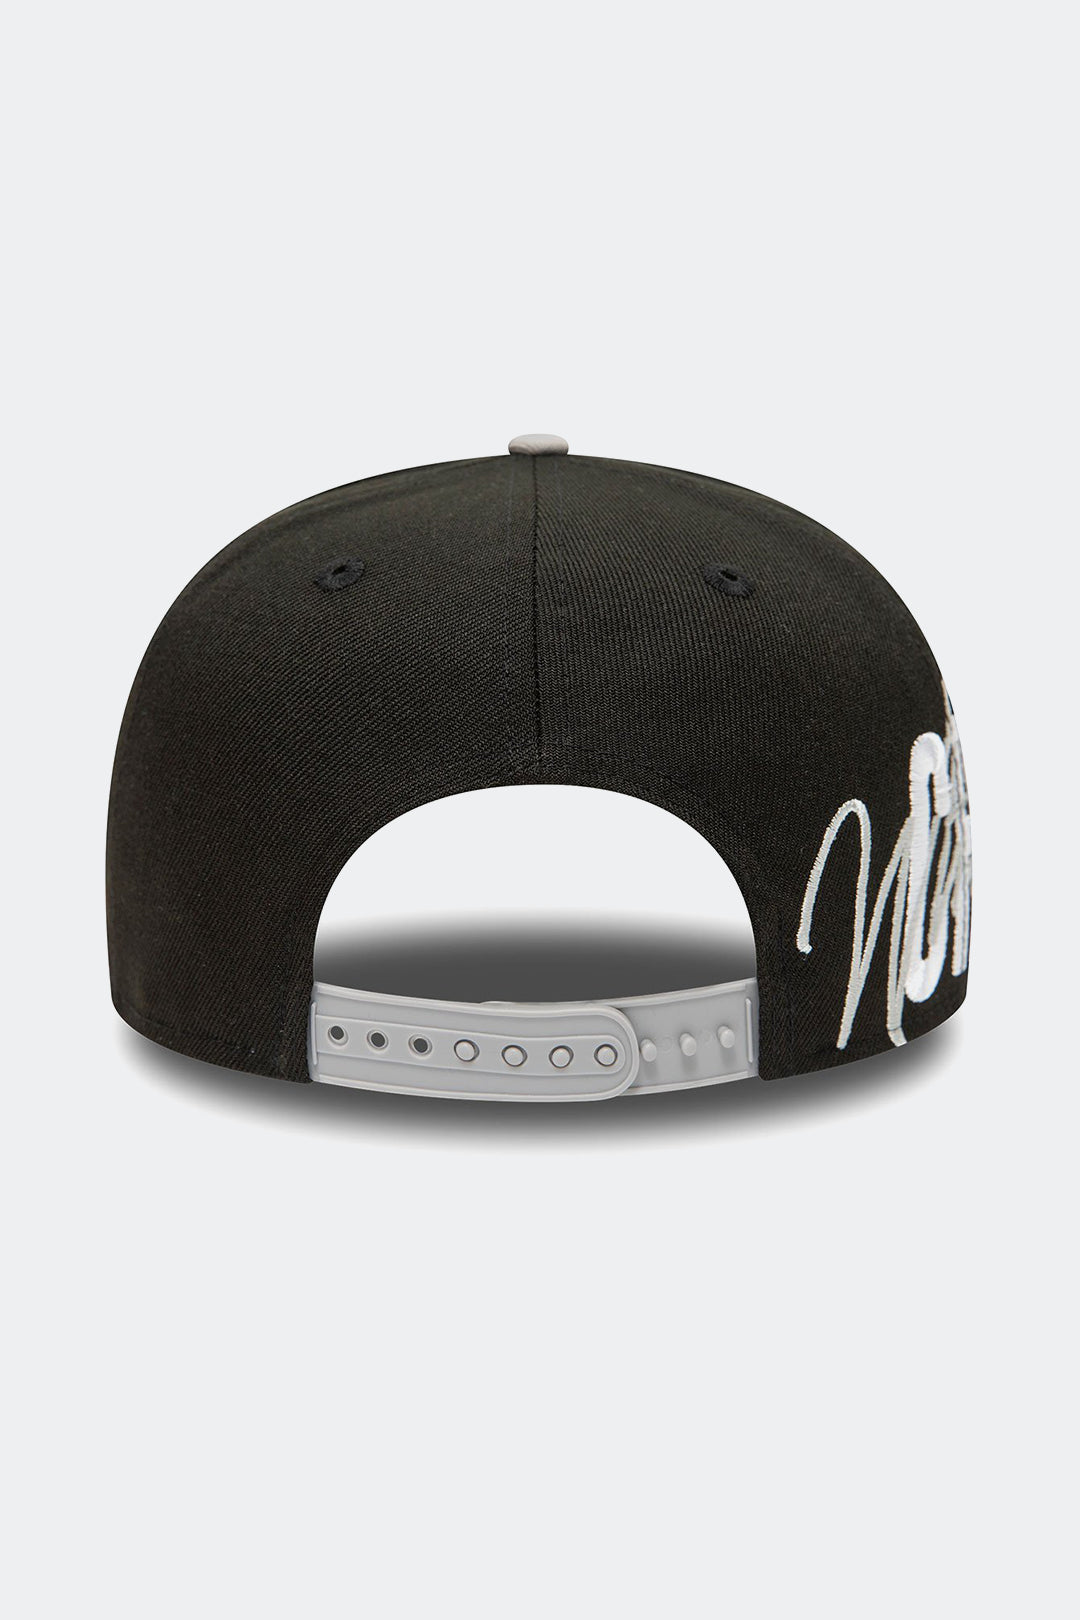 NEW ERA 9FIFTY CHICAGO WHITE SOX "SIDE FONT" - HYPE